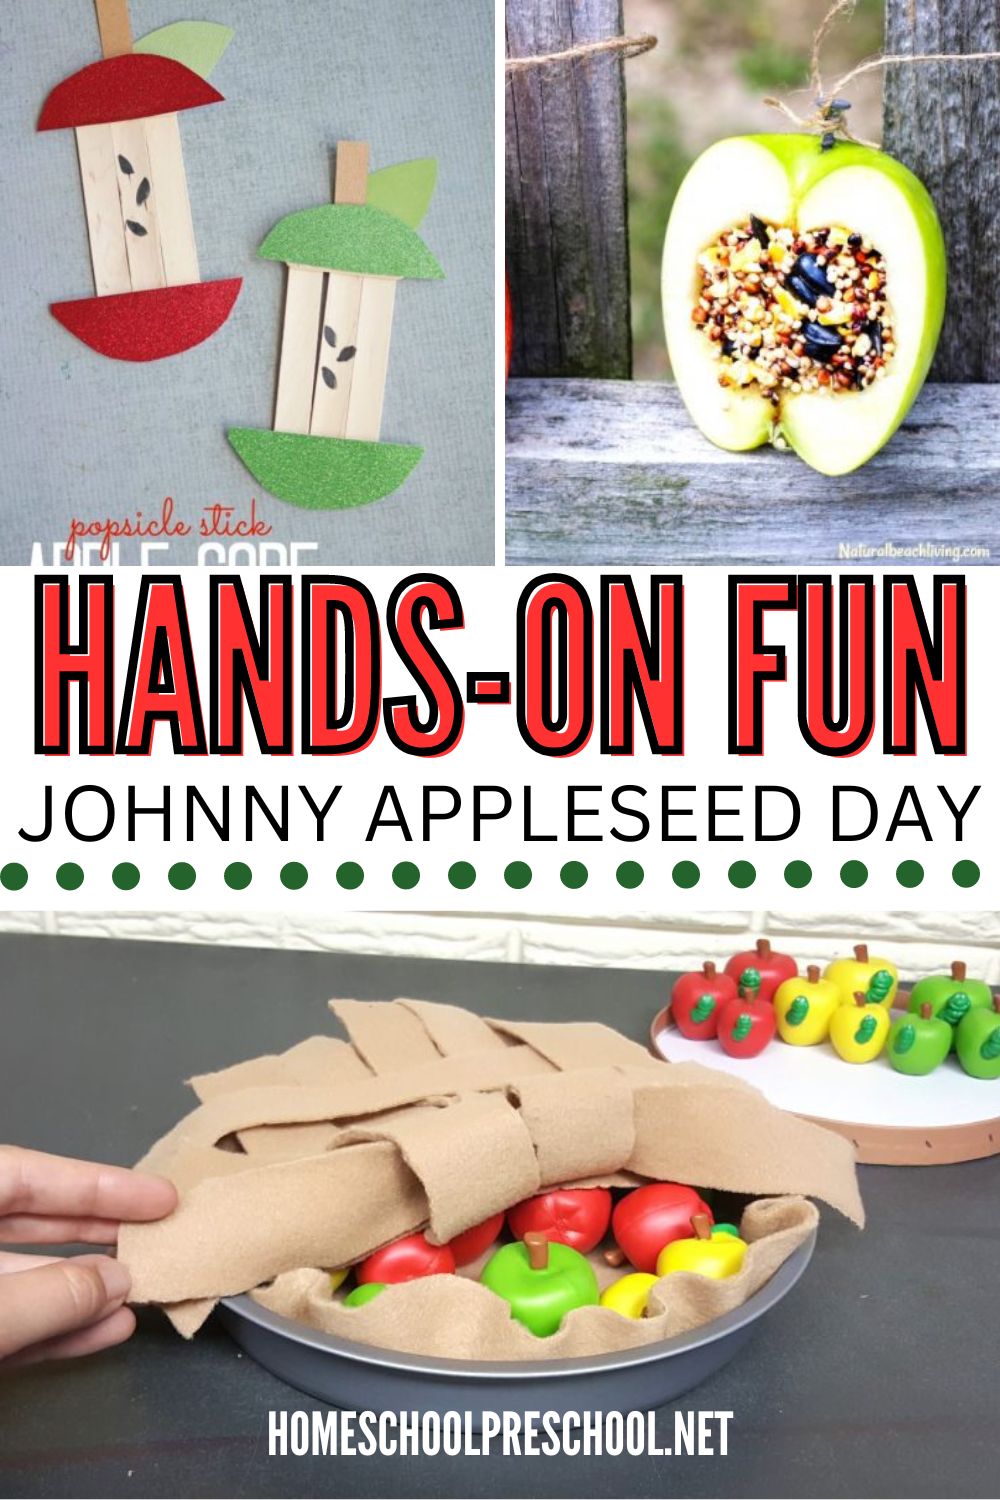 activities-for-johnny-appleseed-day Activities for Johnny Appleseed Day